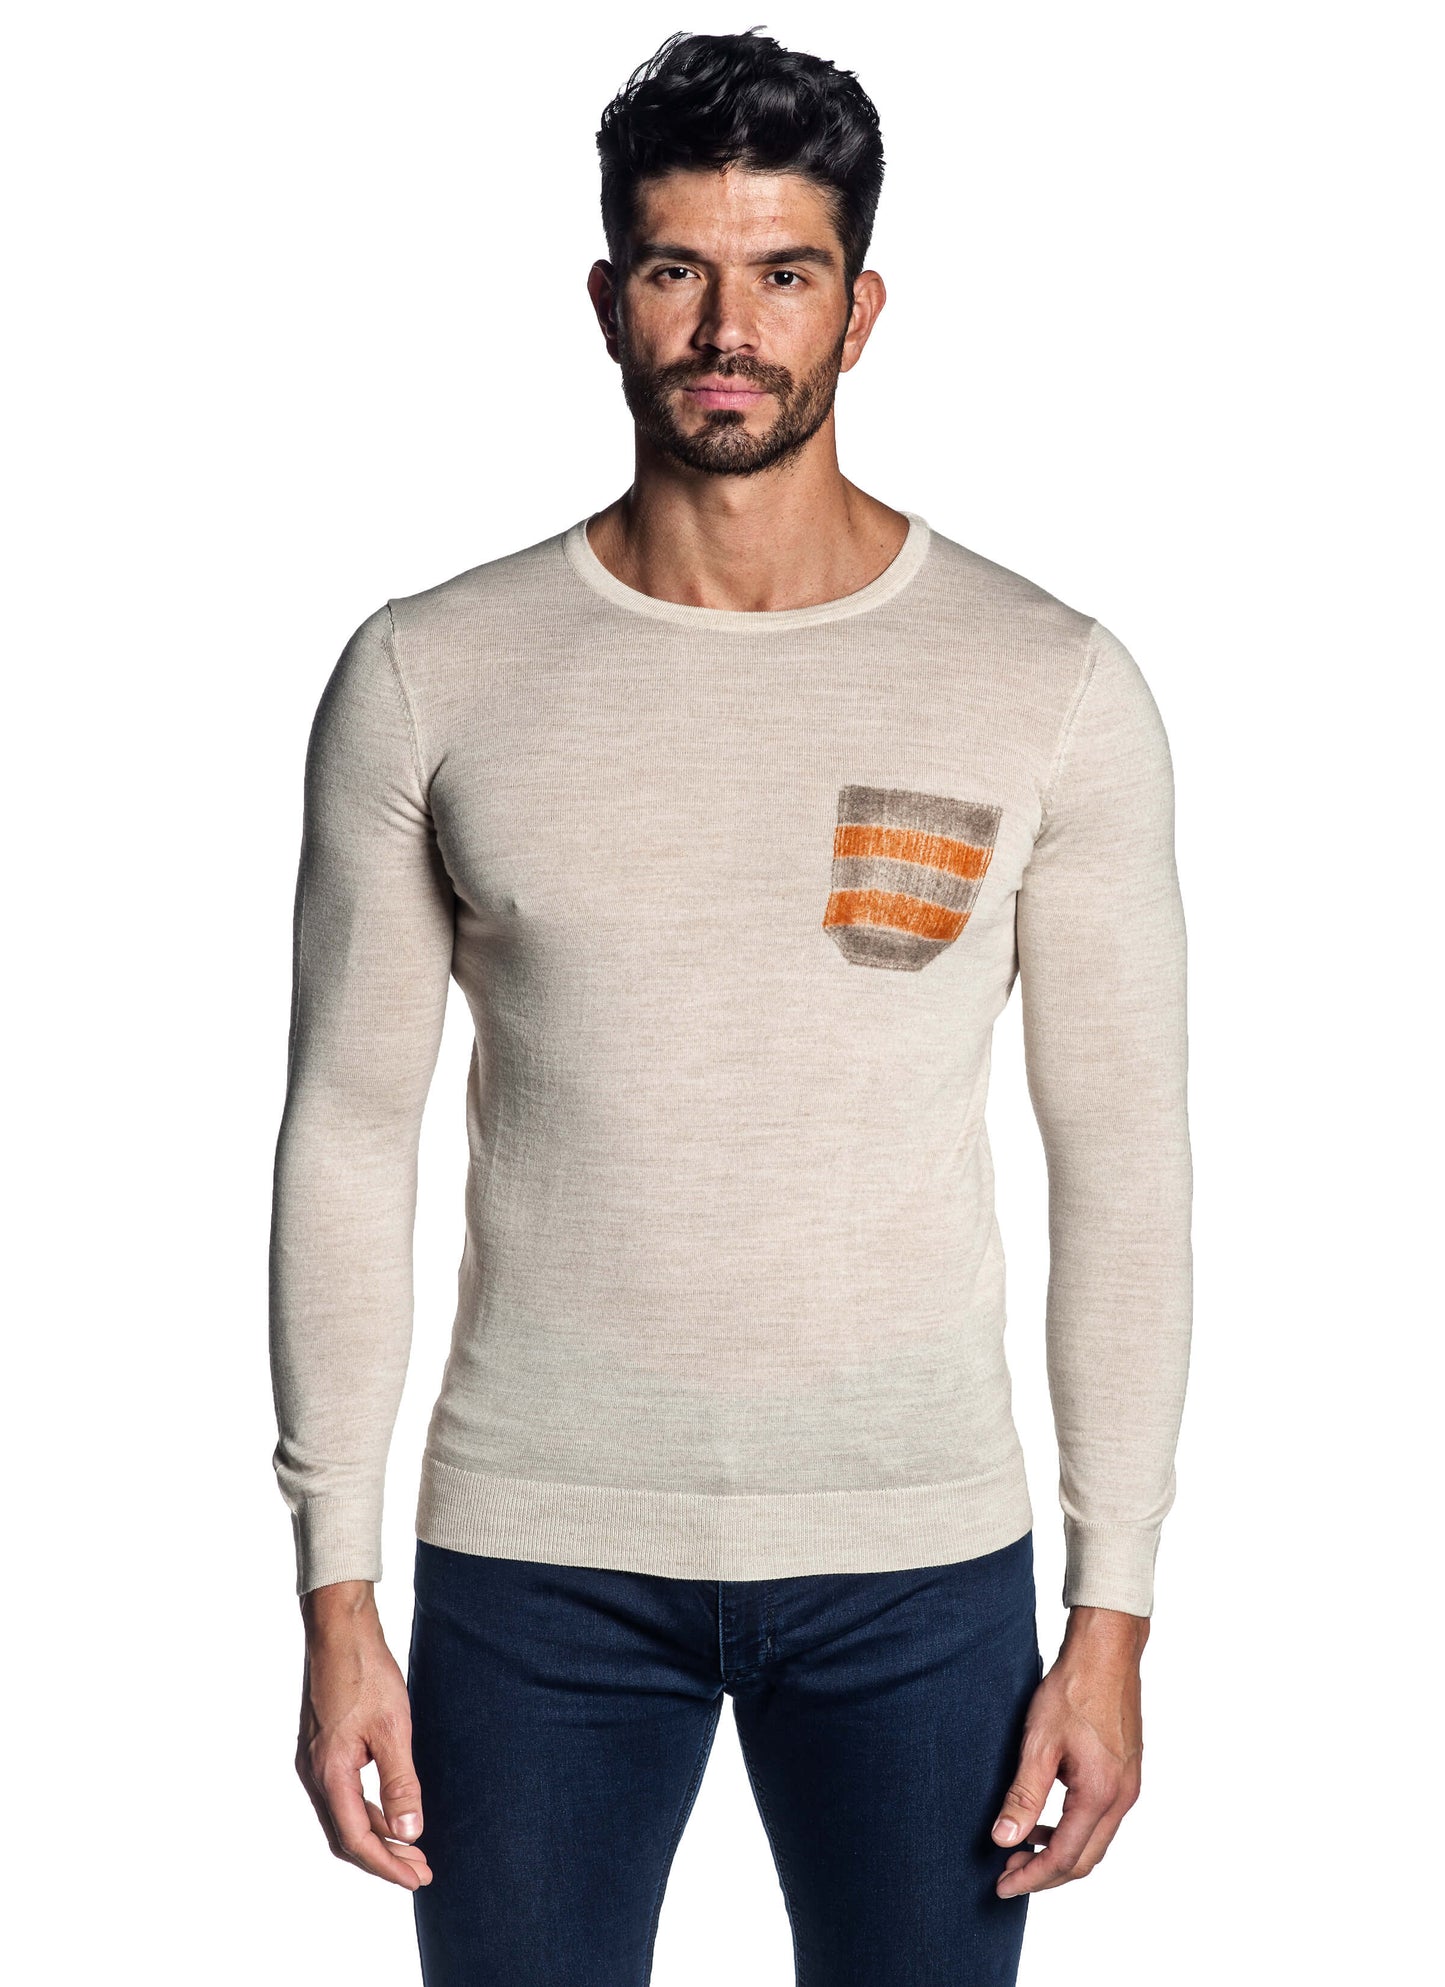 Off-White Crew Neck Sweater for Men H-02682-05 - Front - Jared Lang